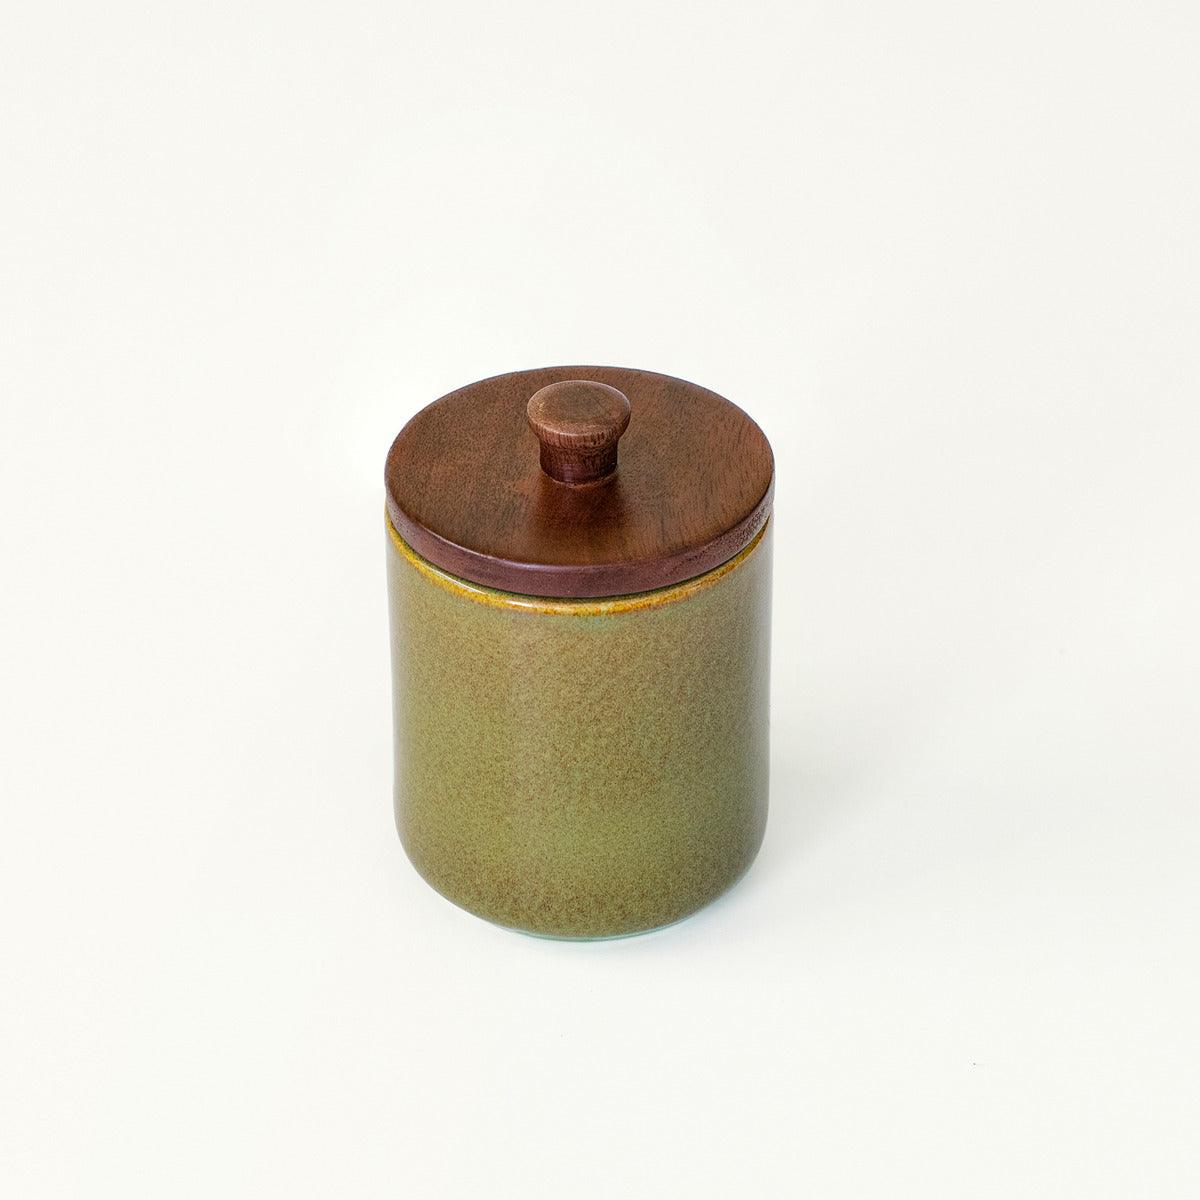 Rustic Sage Ceramic Jar with Wooden Lid (Small)